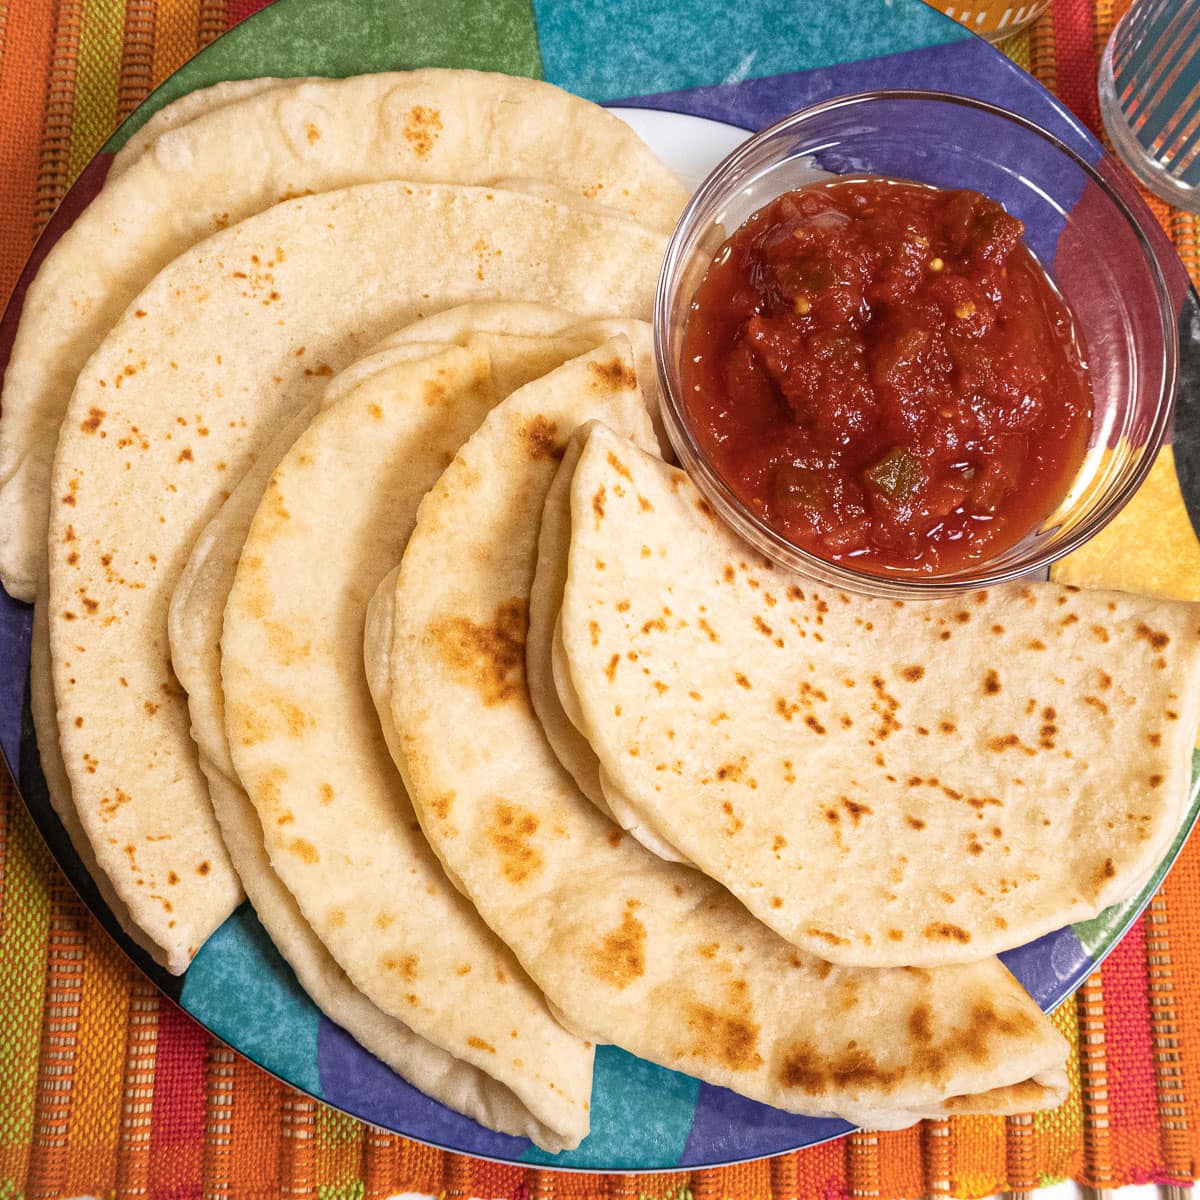 Buttermilk flatbreds on a colorful plate with a bowl of salsa.